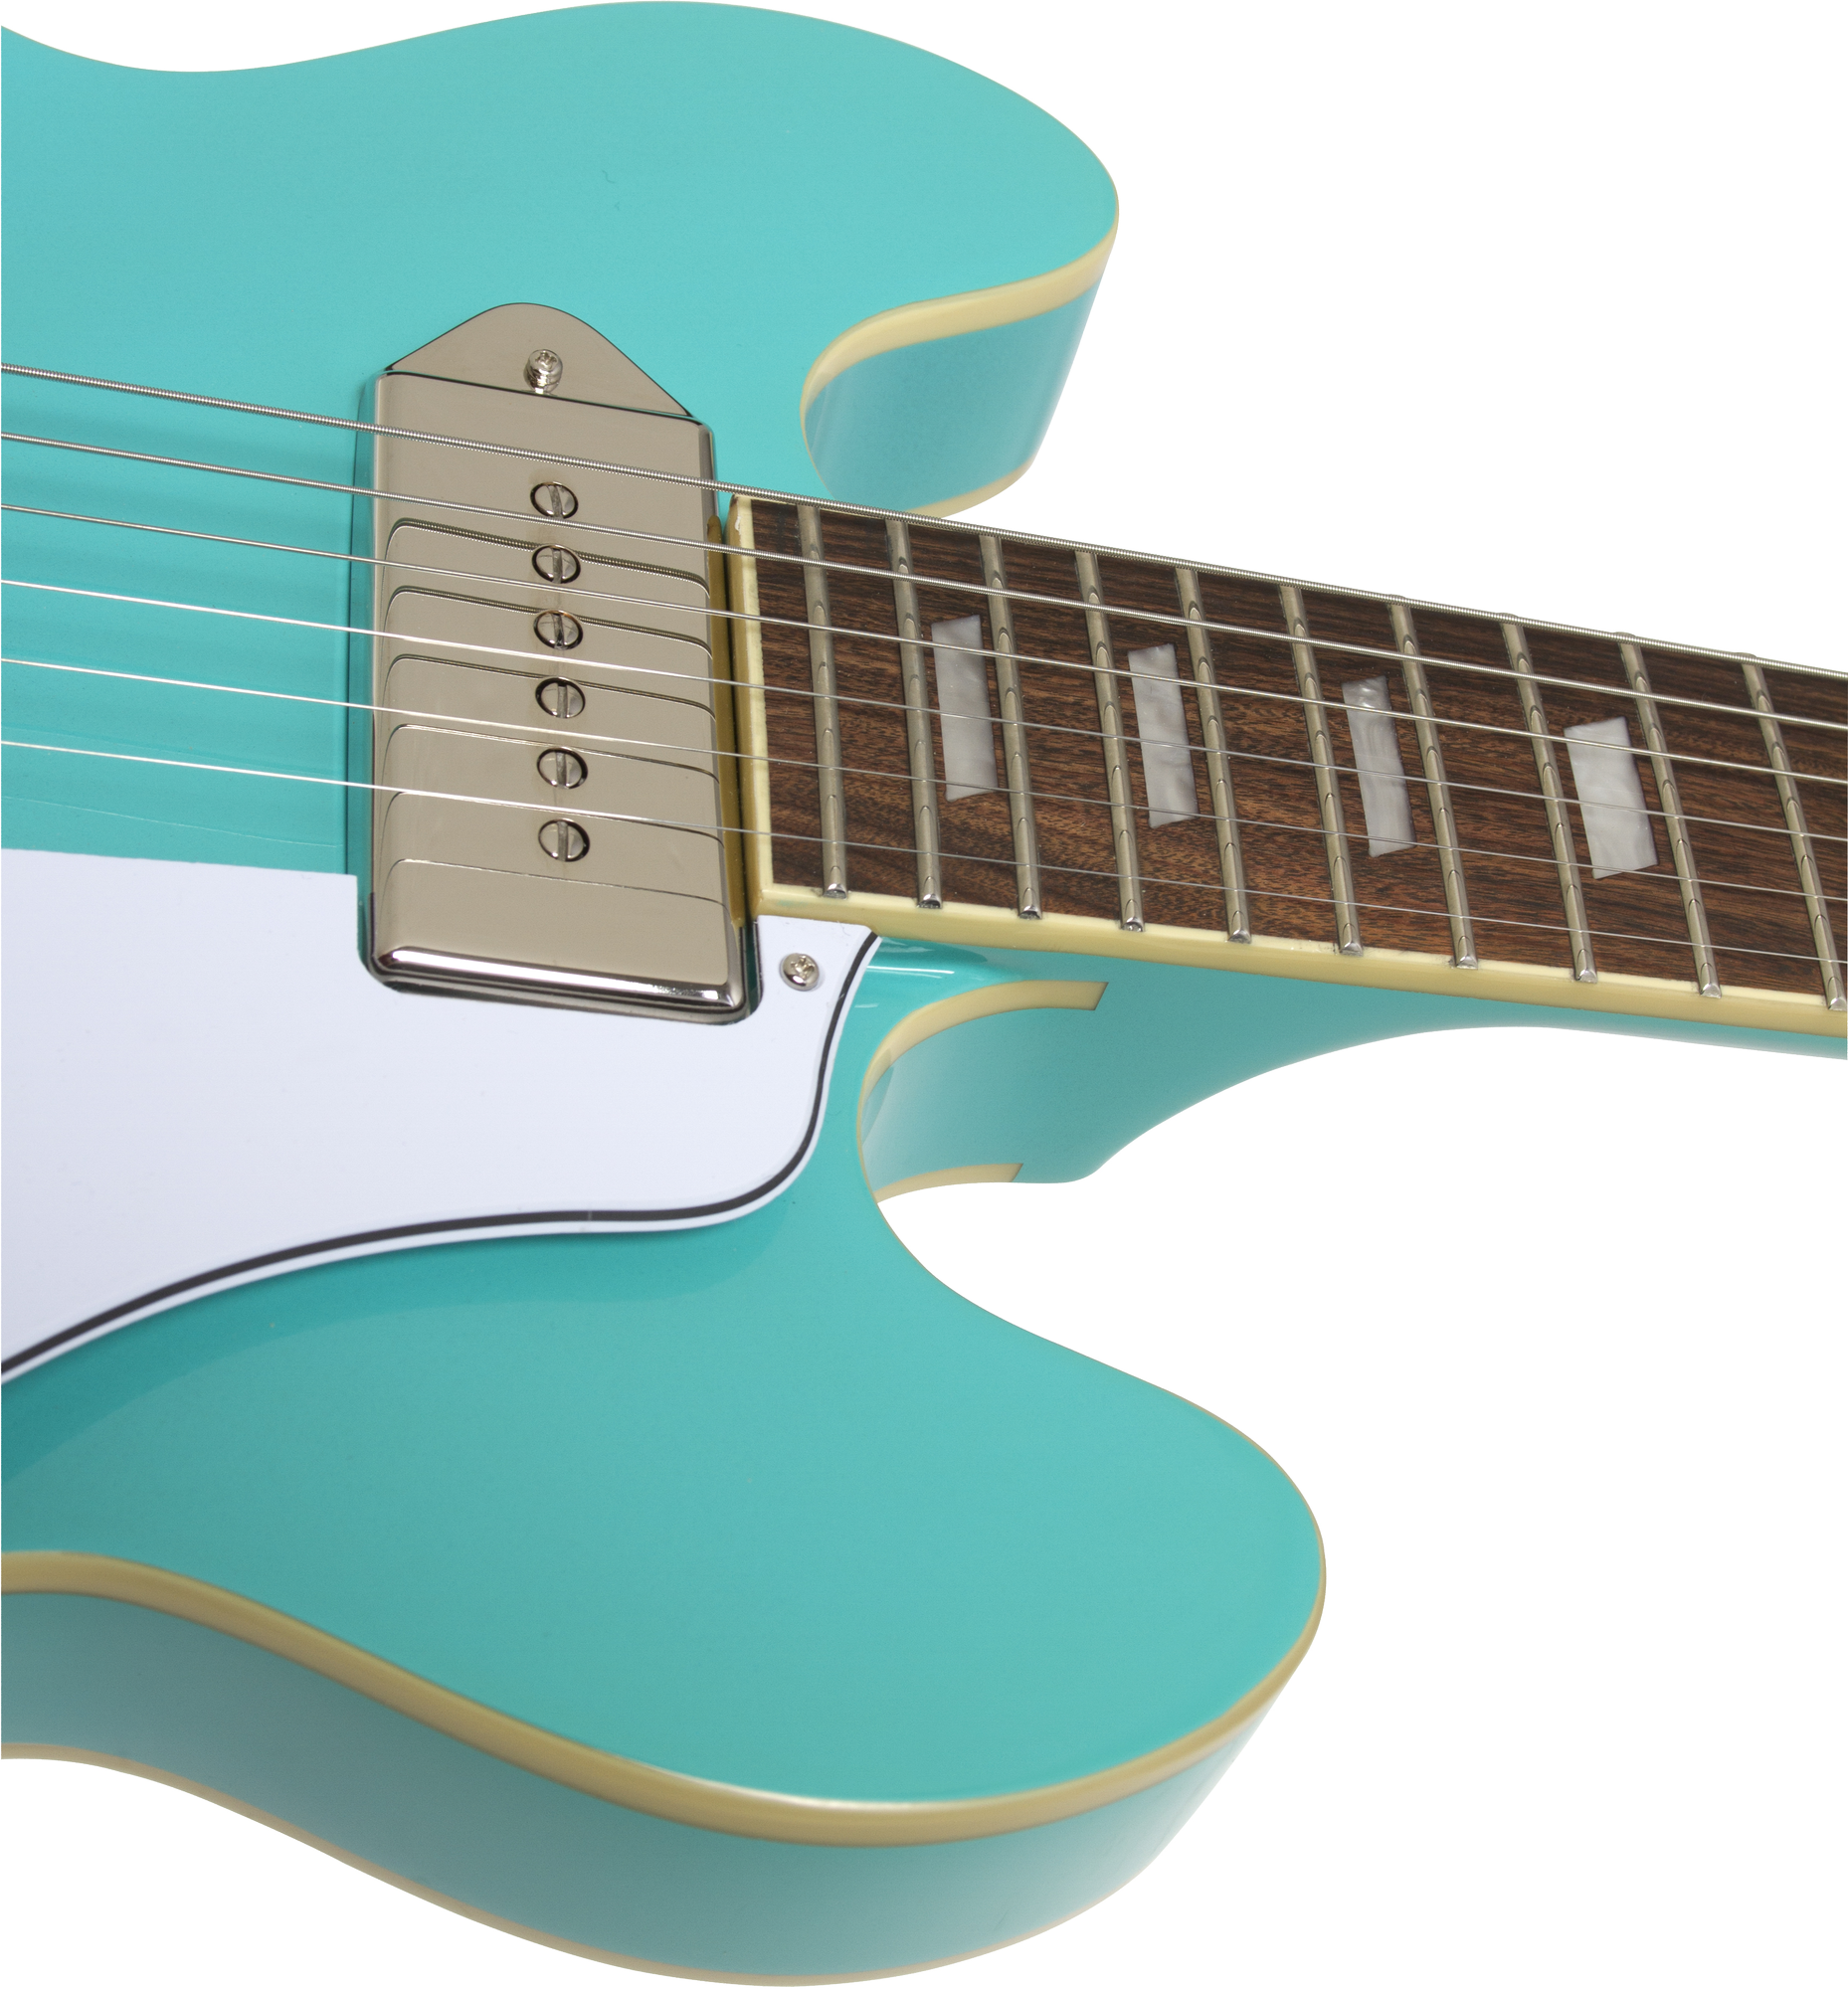 Casino Coupe Turquoise